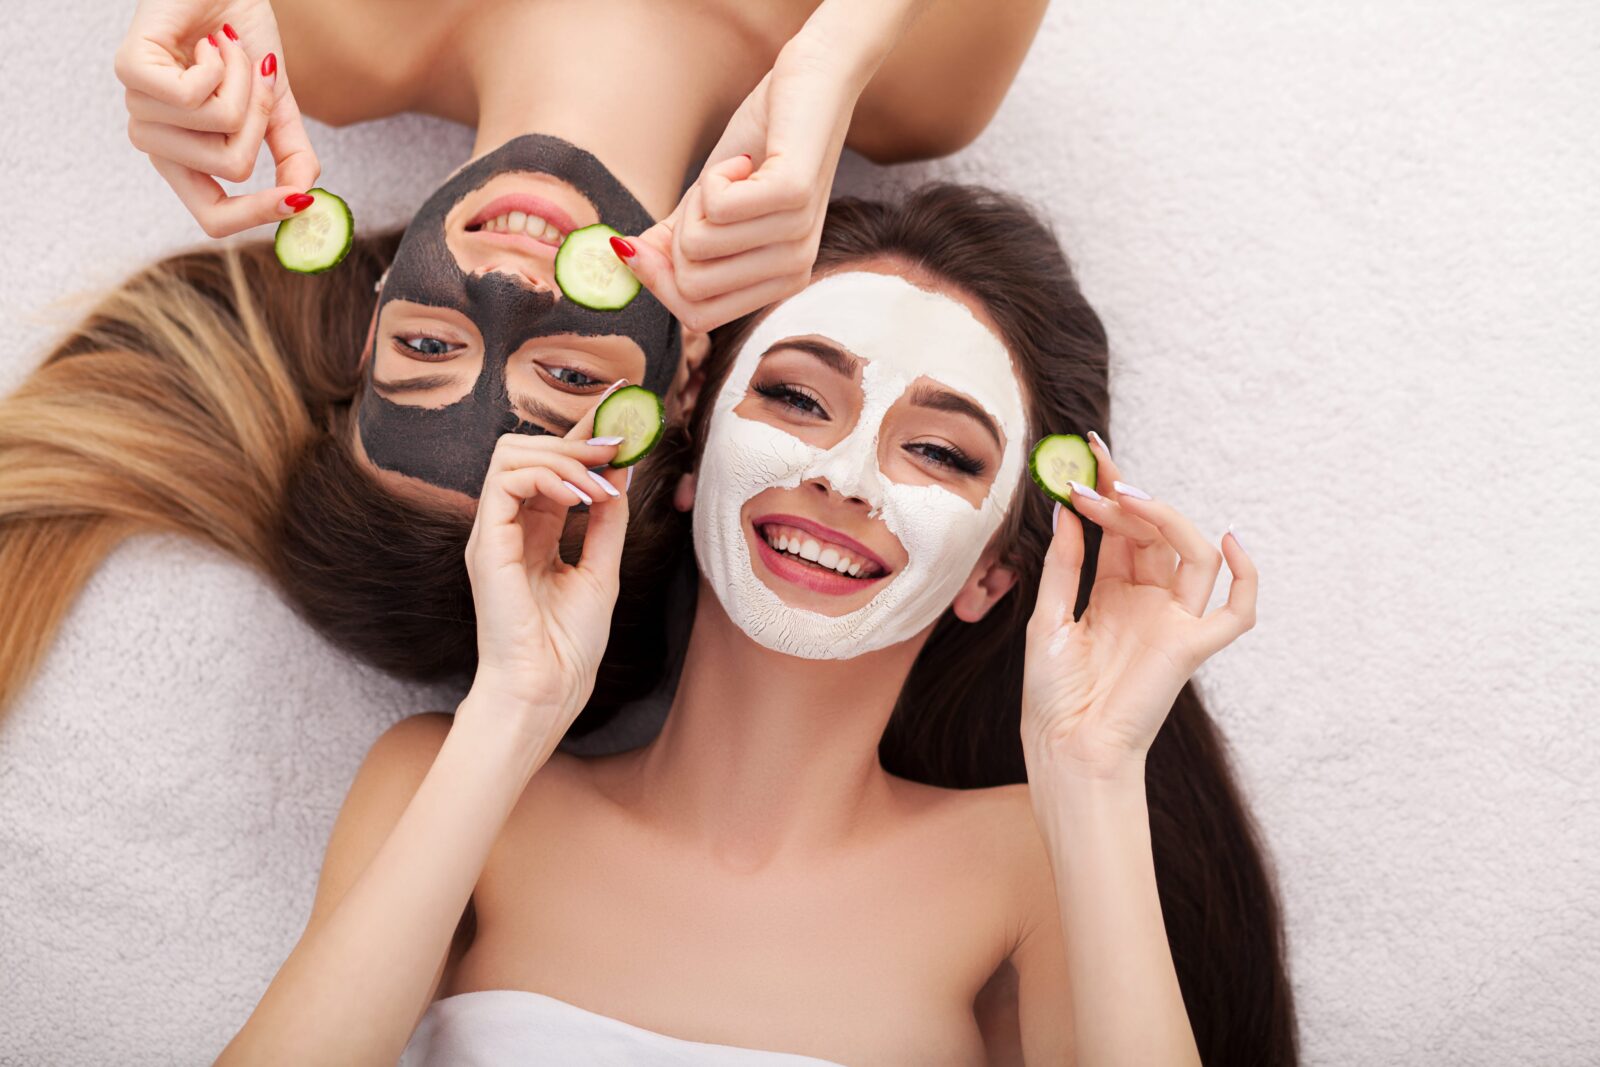 A picture of two girls friends relaxing with facial masks on over white background